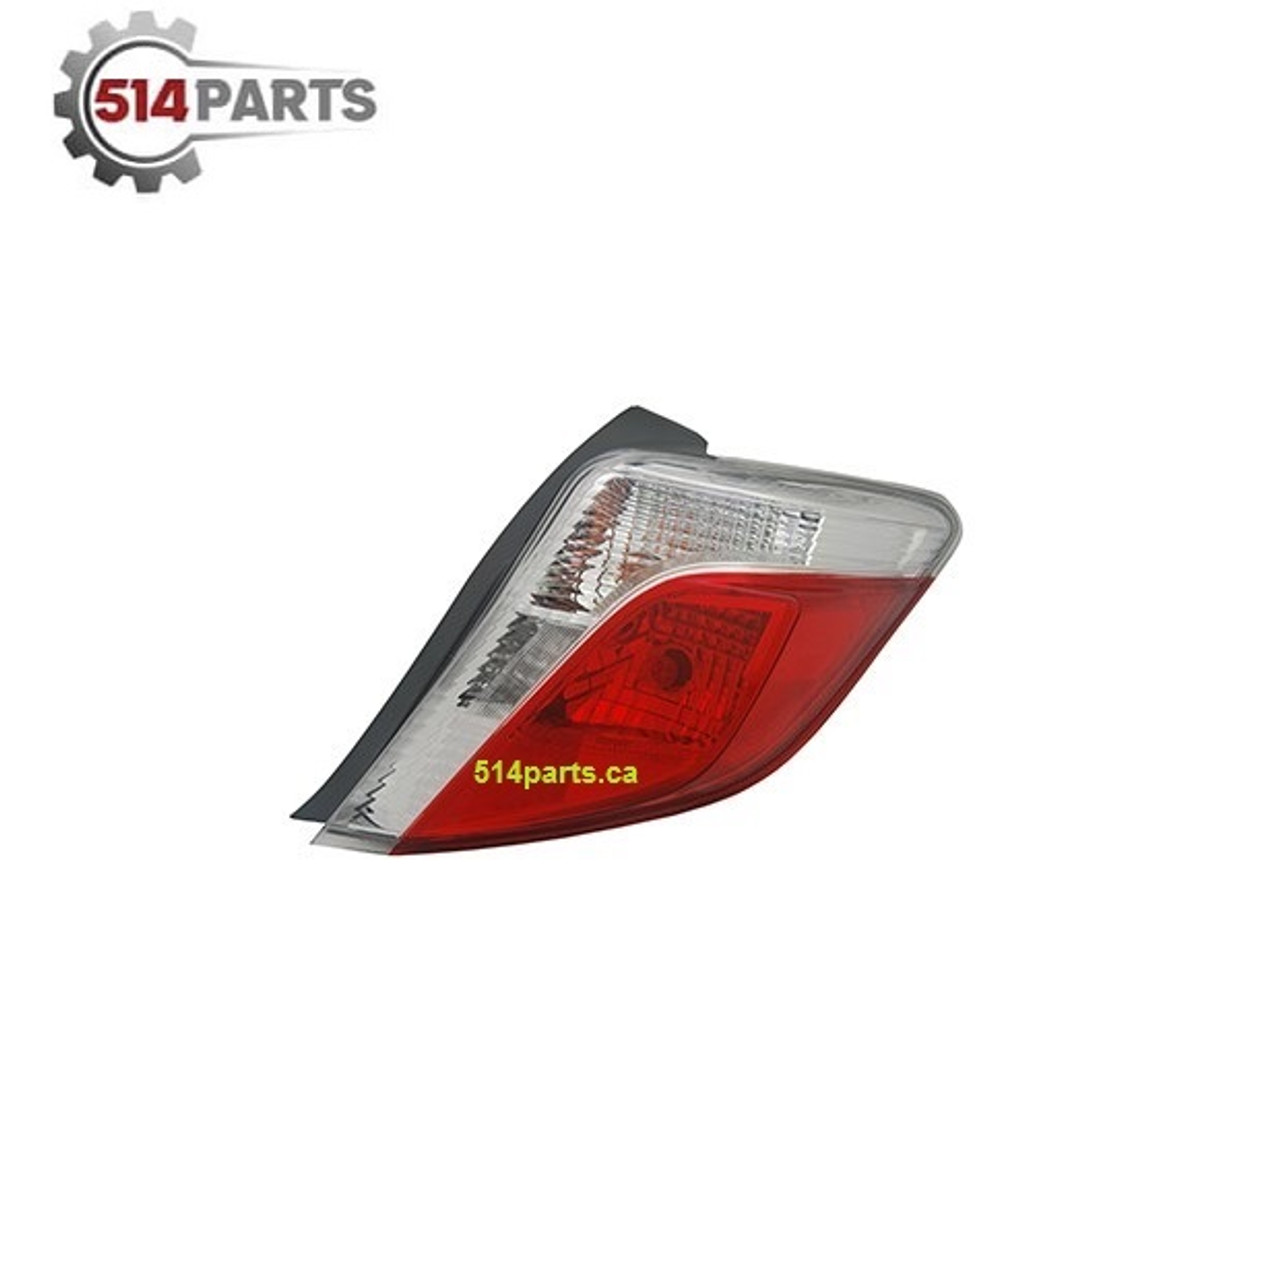 2012 - 2014 TOYOTA YARIS HATCHBACK TAIL LIGHTS High Quality - PHARES ARRIERE Haute Qualite